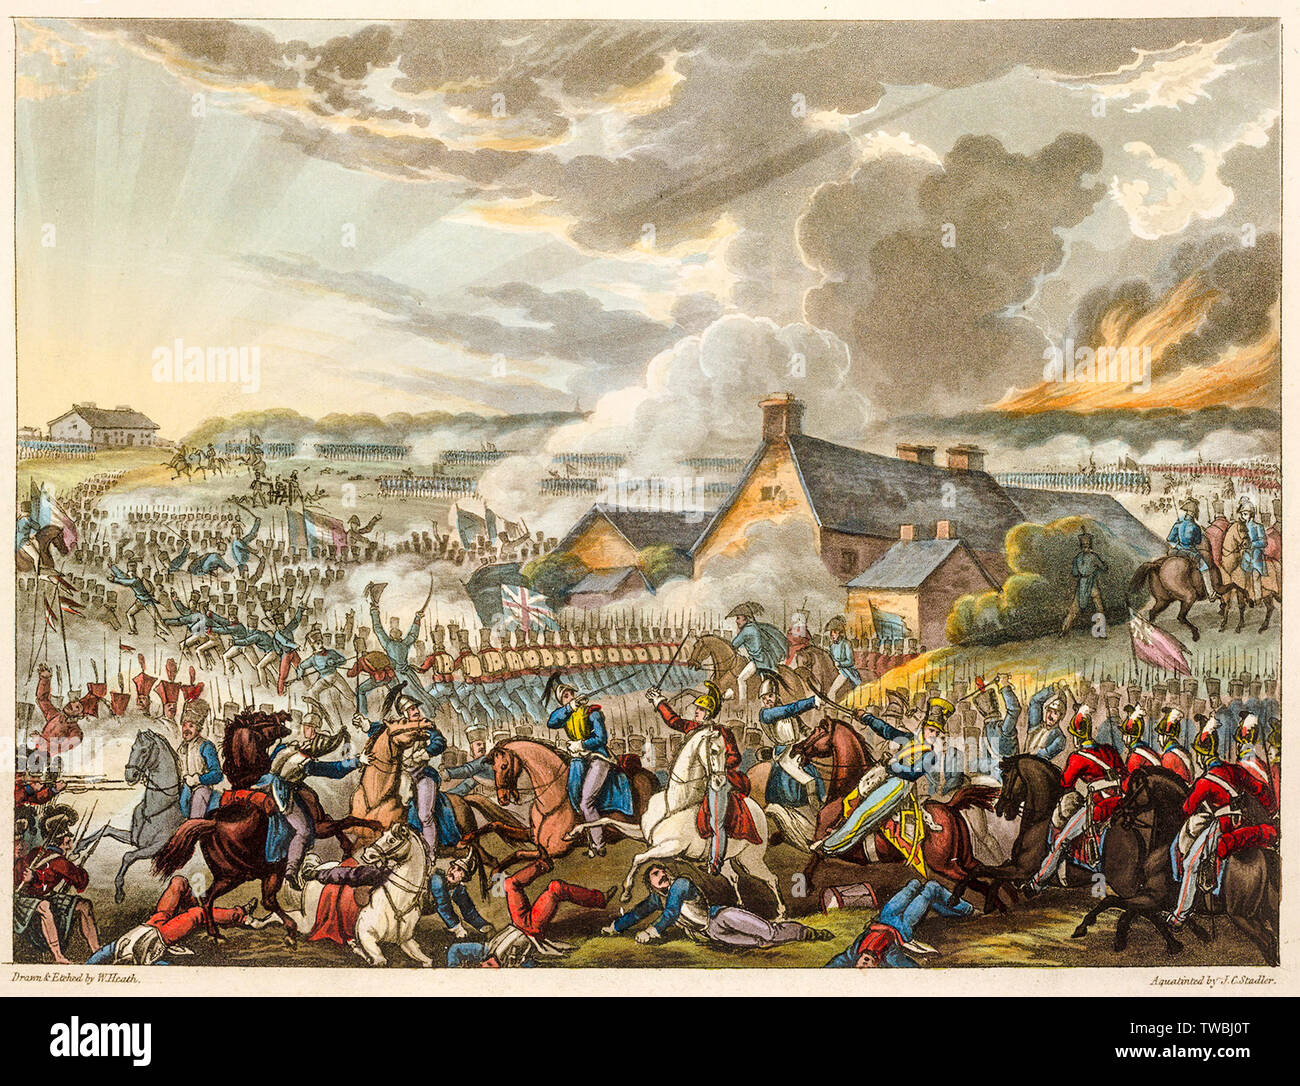 The Battle of Waterloo, June 18th 1815, engraving, 1819 Stock Photo